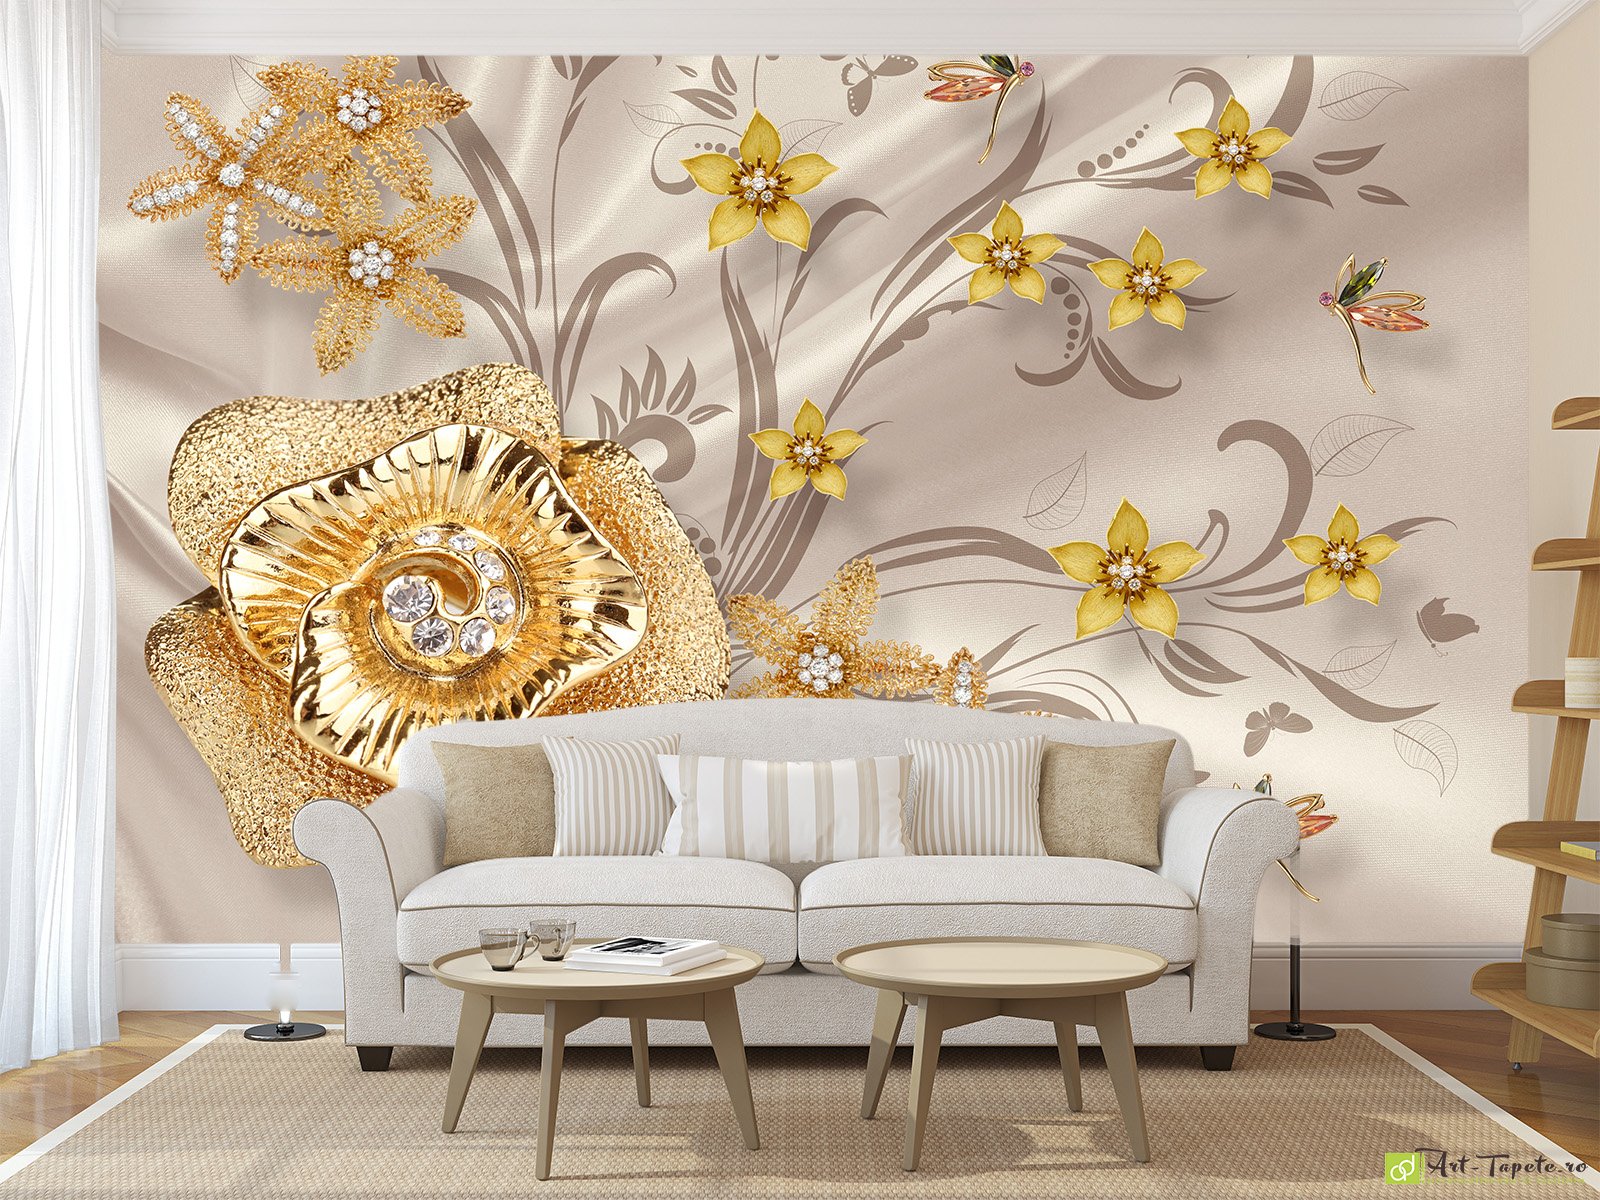 Photo Wallpaper 3D Effect - Decorations on silk_3  Check out  our stunning photo wallpaper options for a quality wall mural Buy Online